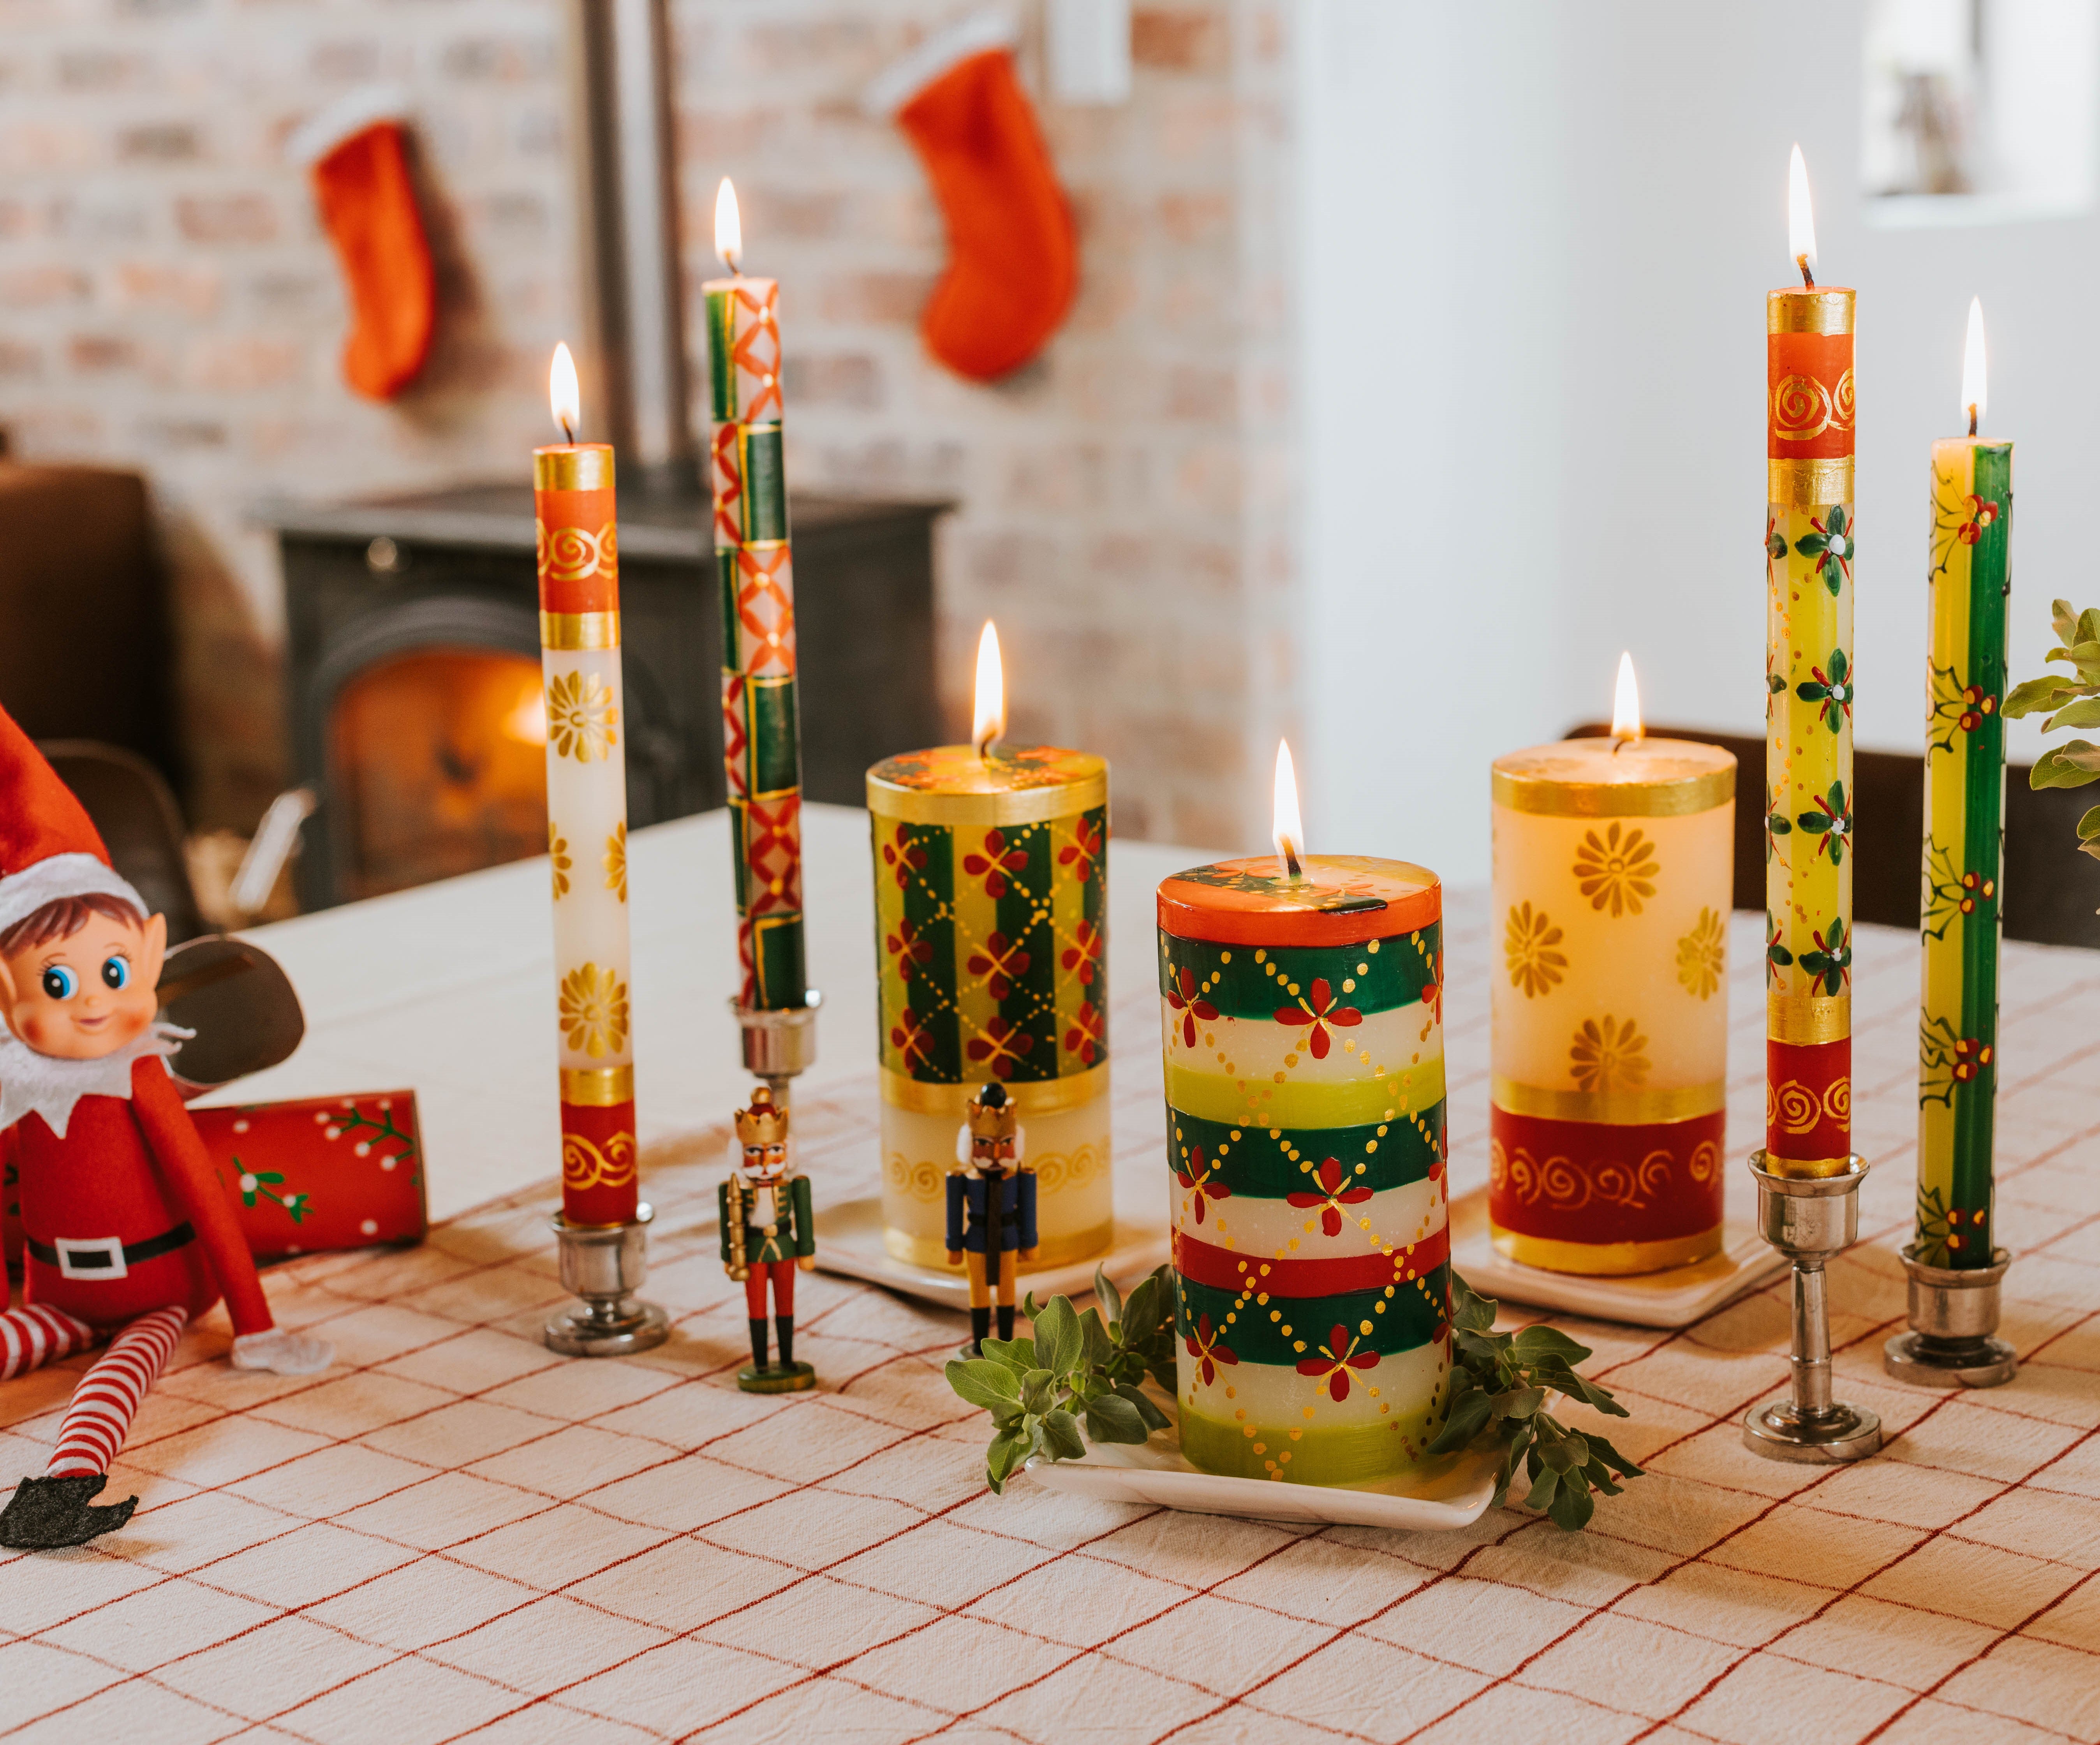 Lifestyle photo of 3 Christmas pillars & 4 dinner tapers as the centerpiece of the dinner table. Stocking are hung in background with a lovely fire glowing. So pretty!